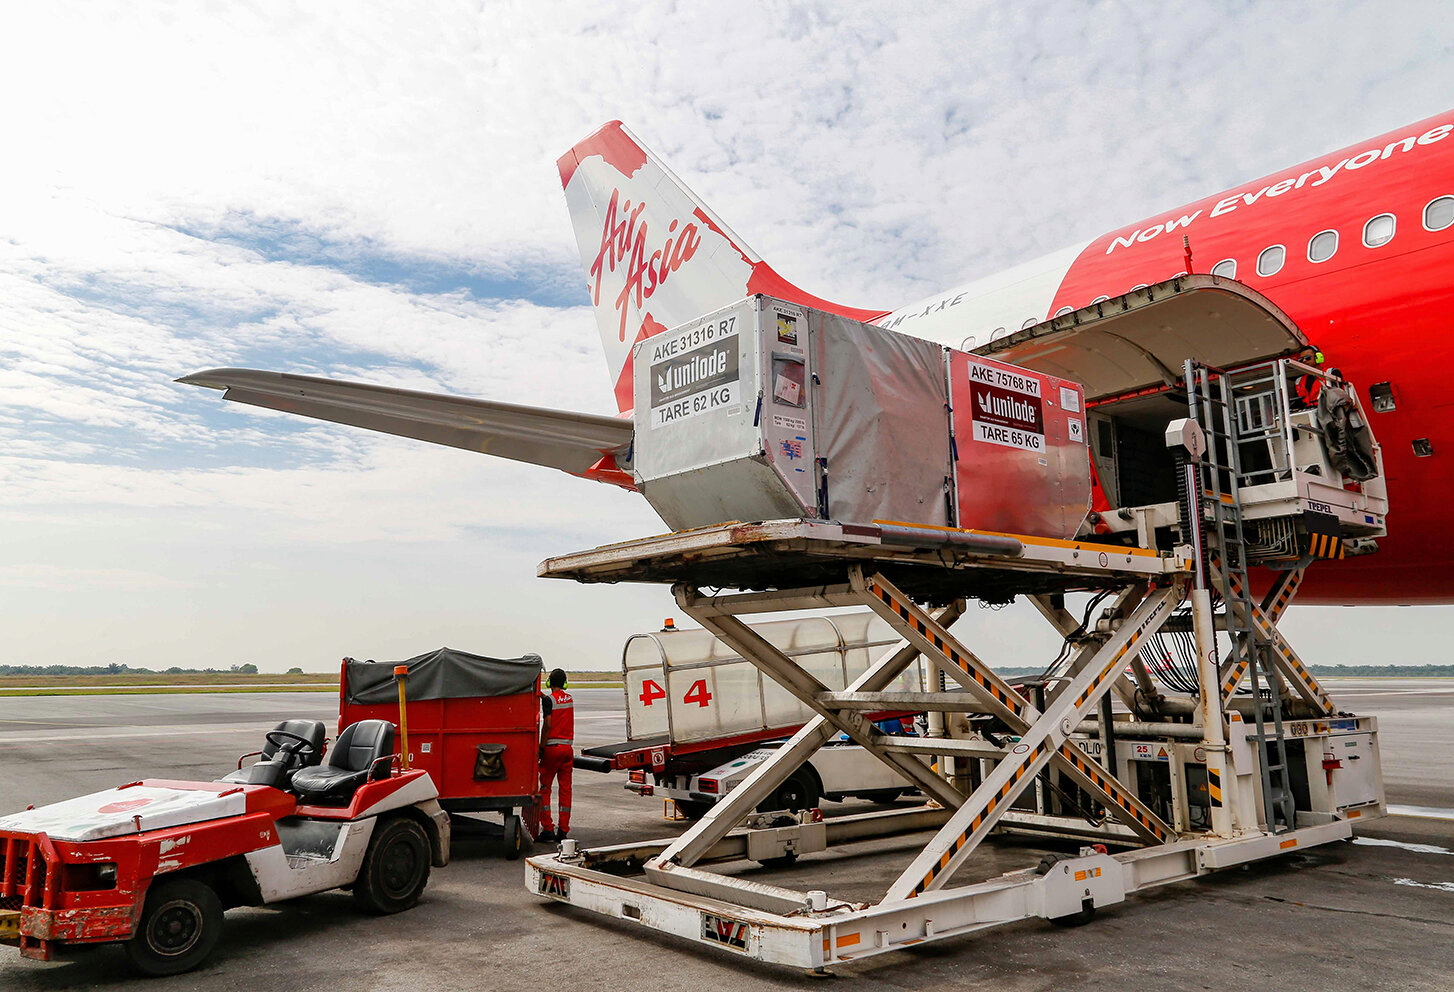 Teleport, the logistics venture of AirAsia Digital, says it is ready to focus its operations to support the distribution of COVID19 vaccines in the region. AirAsia’s network in Southeast Asia covers 125 cities. Click to enlarge.